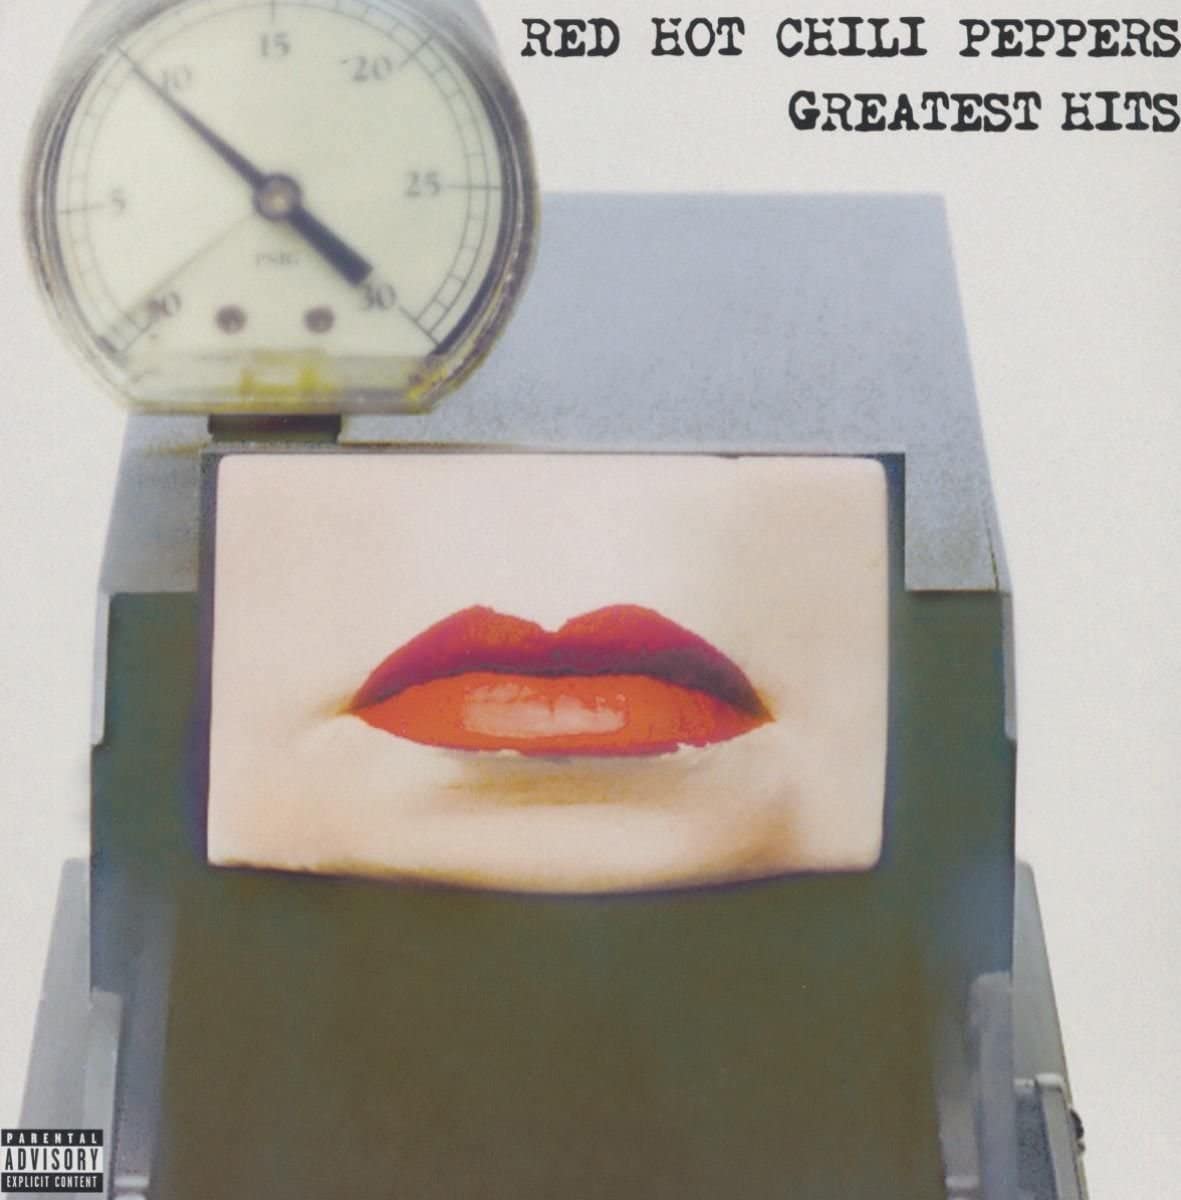 Red Hot Chili Peppers/Greatest Hits [LP]